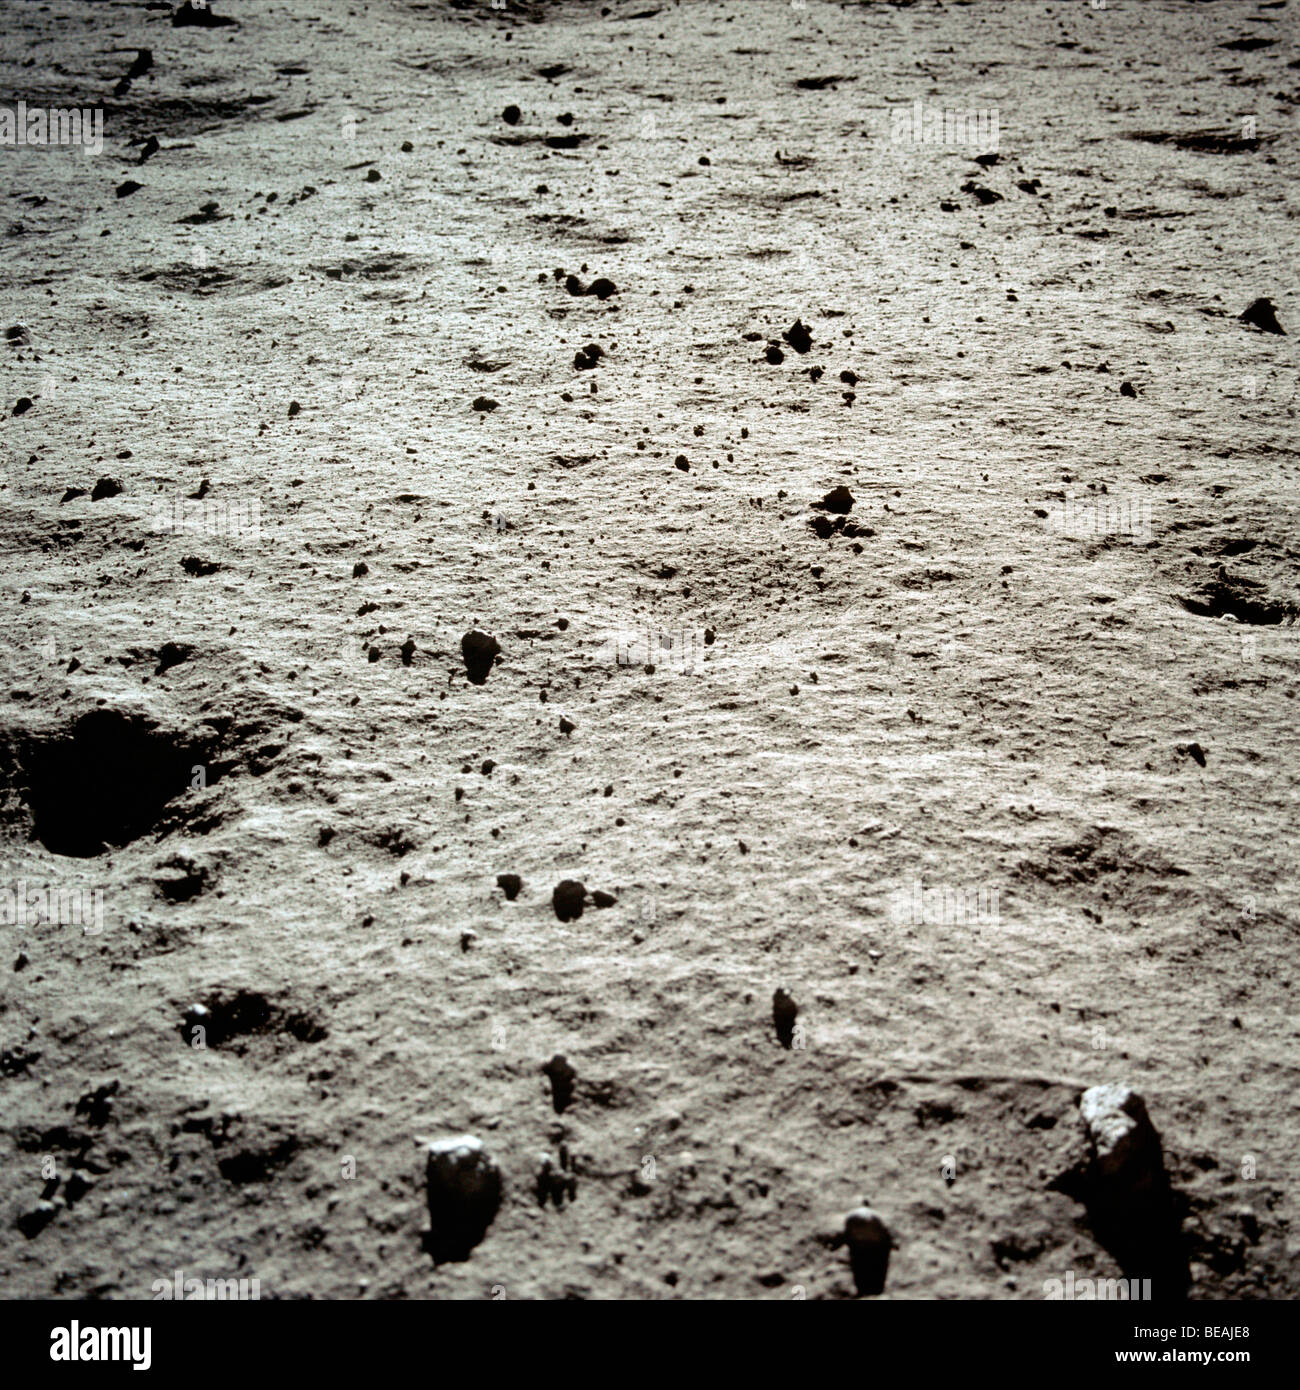 The lunar surface photographed during the Apollo 11 mission Optimised and enhanced version of an original NASA image Credit NASA Stock Photo